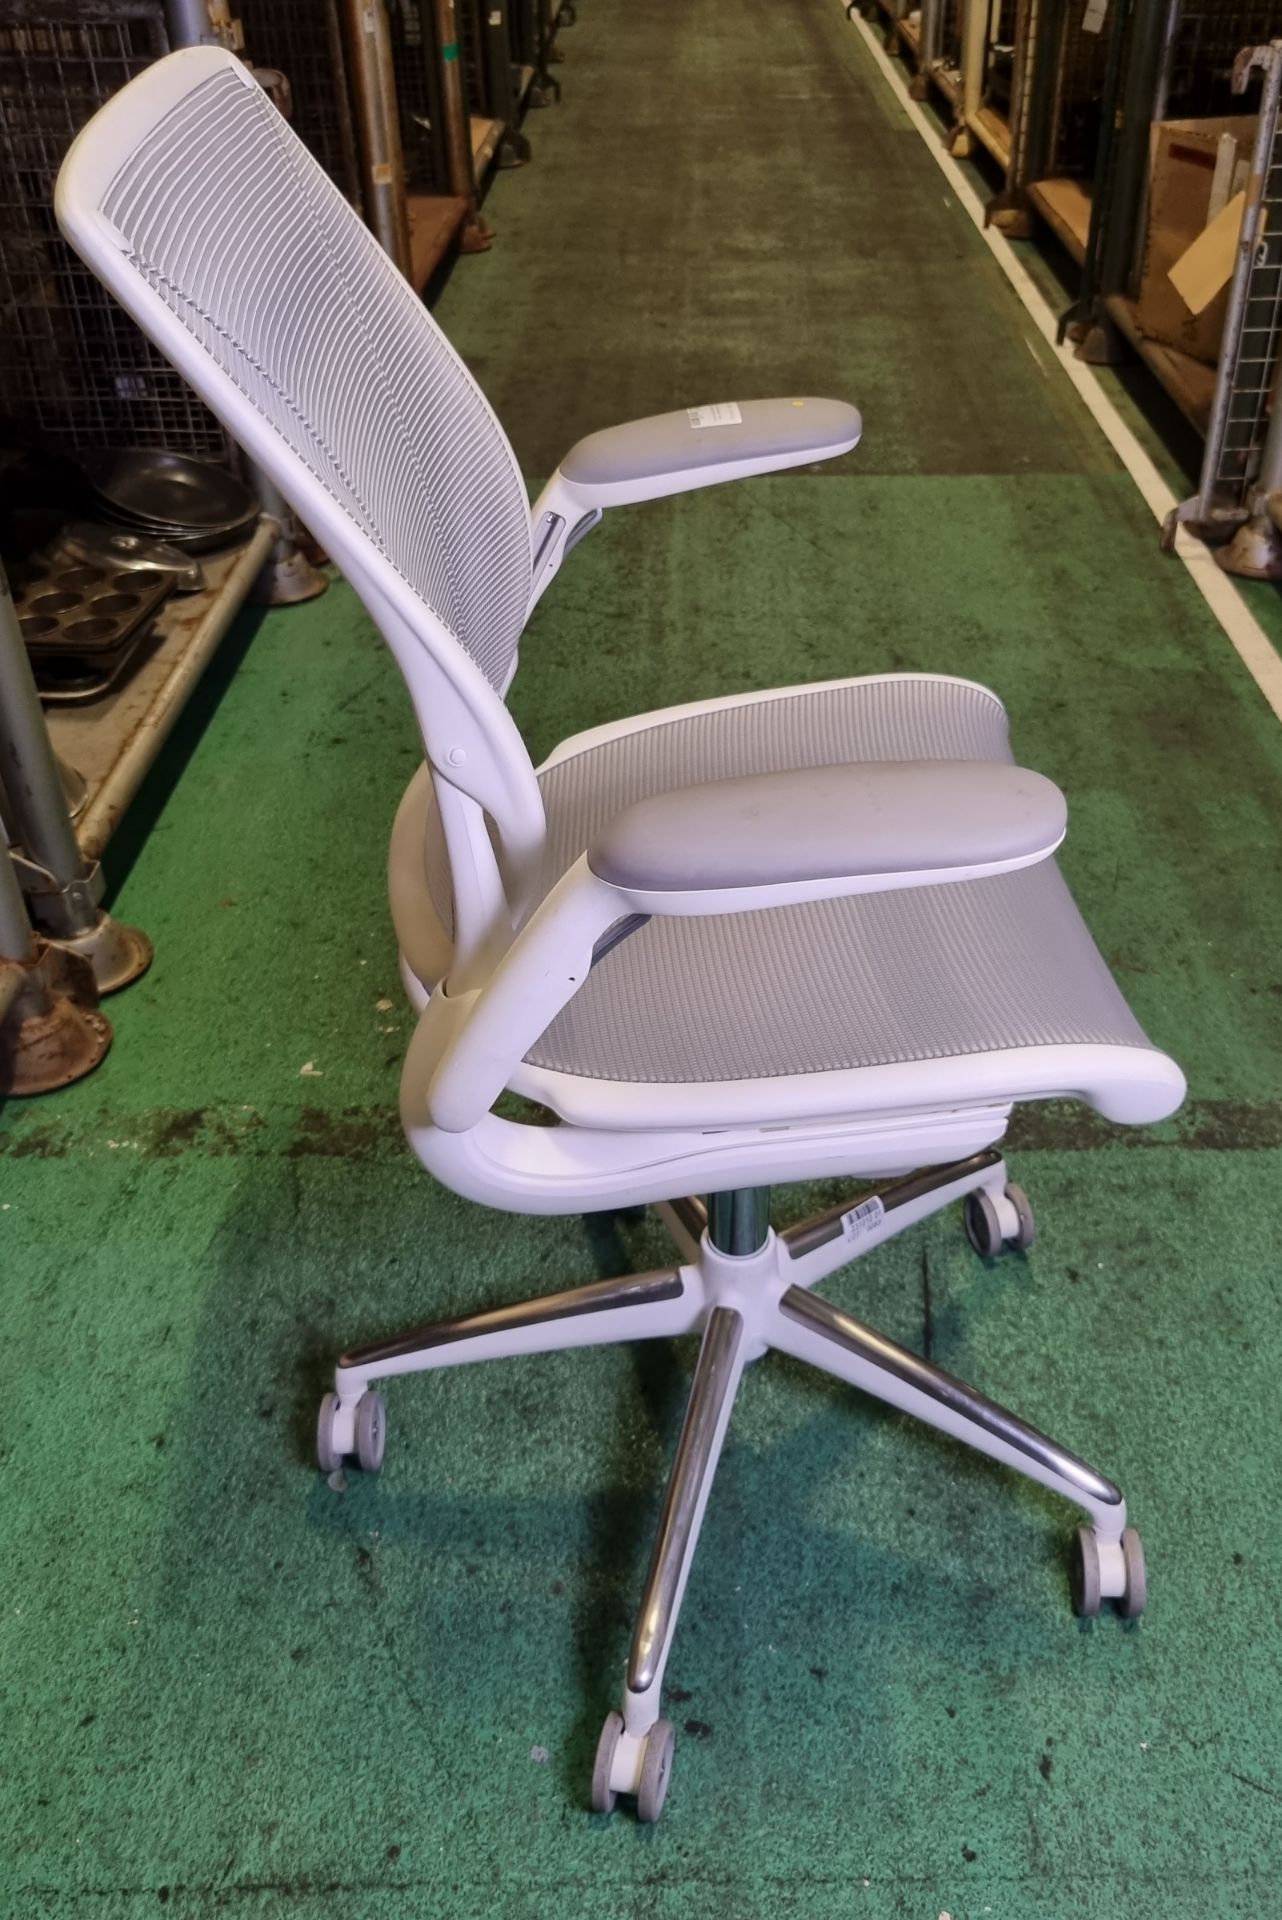 Humanscale Diffrient World mesh office chair - white - Image 2 of 4